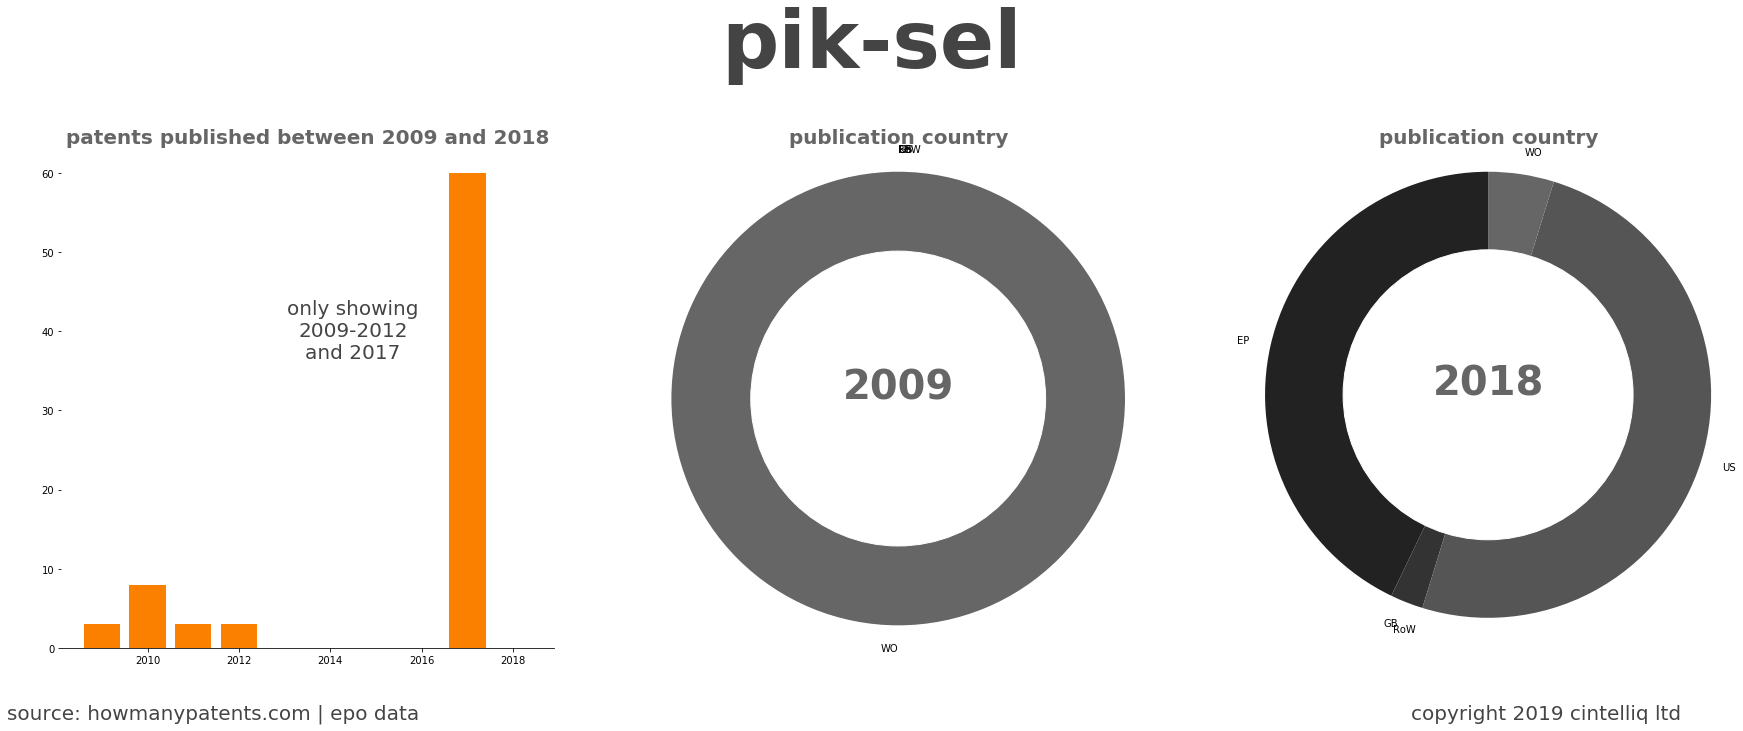 summary of patents for Pik-Sel